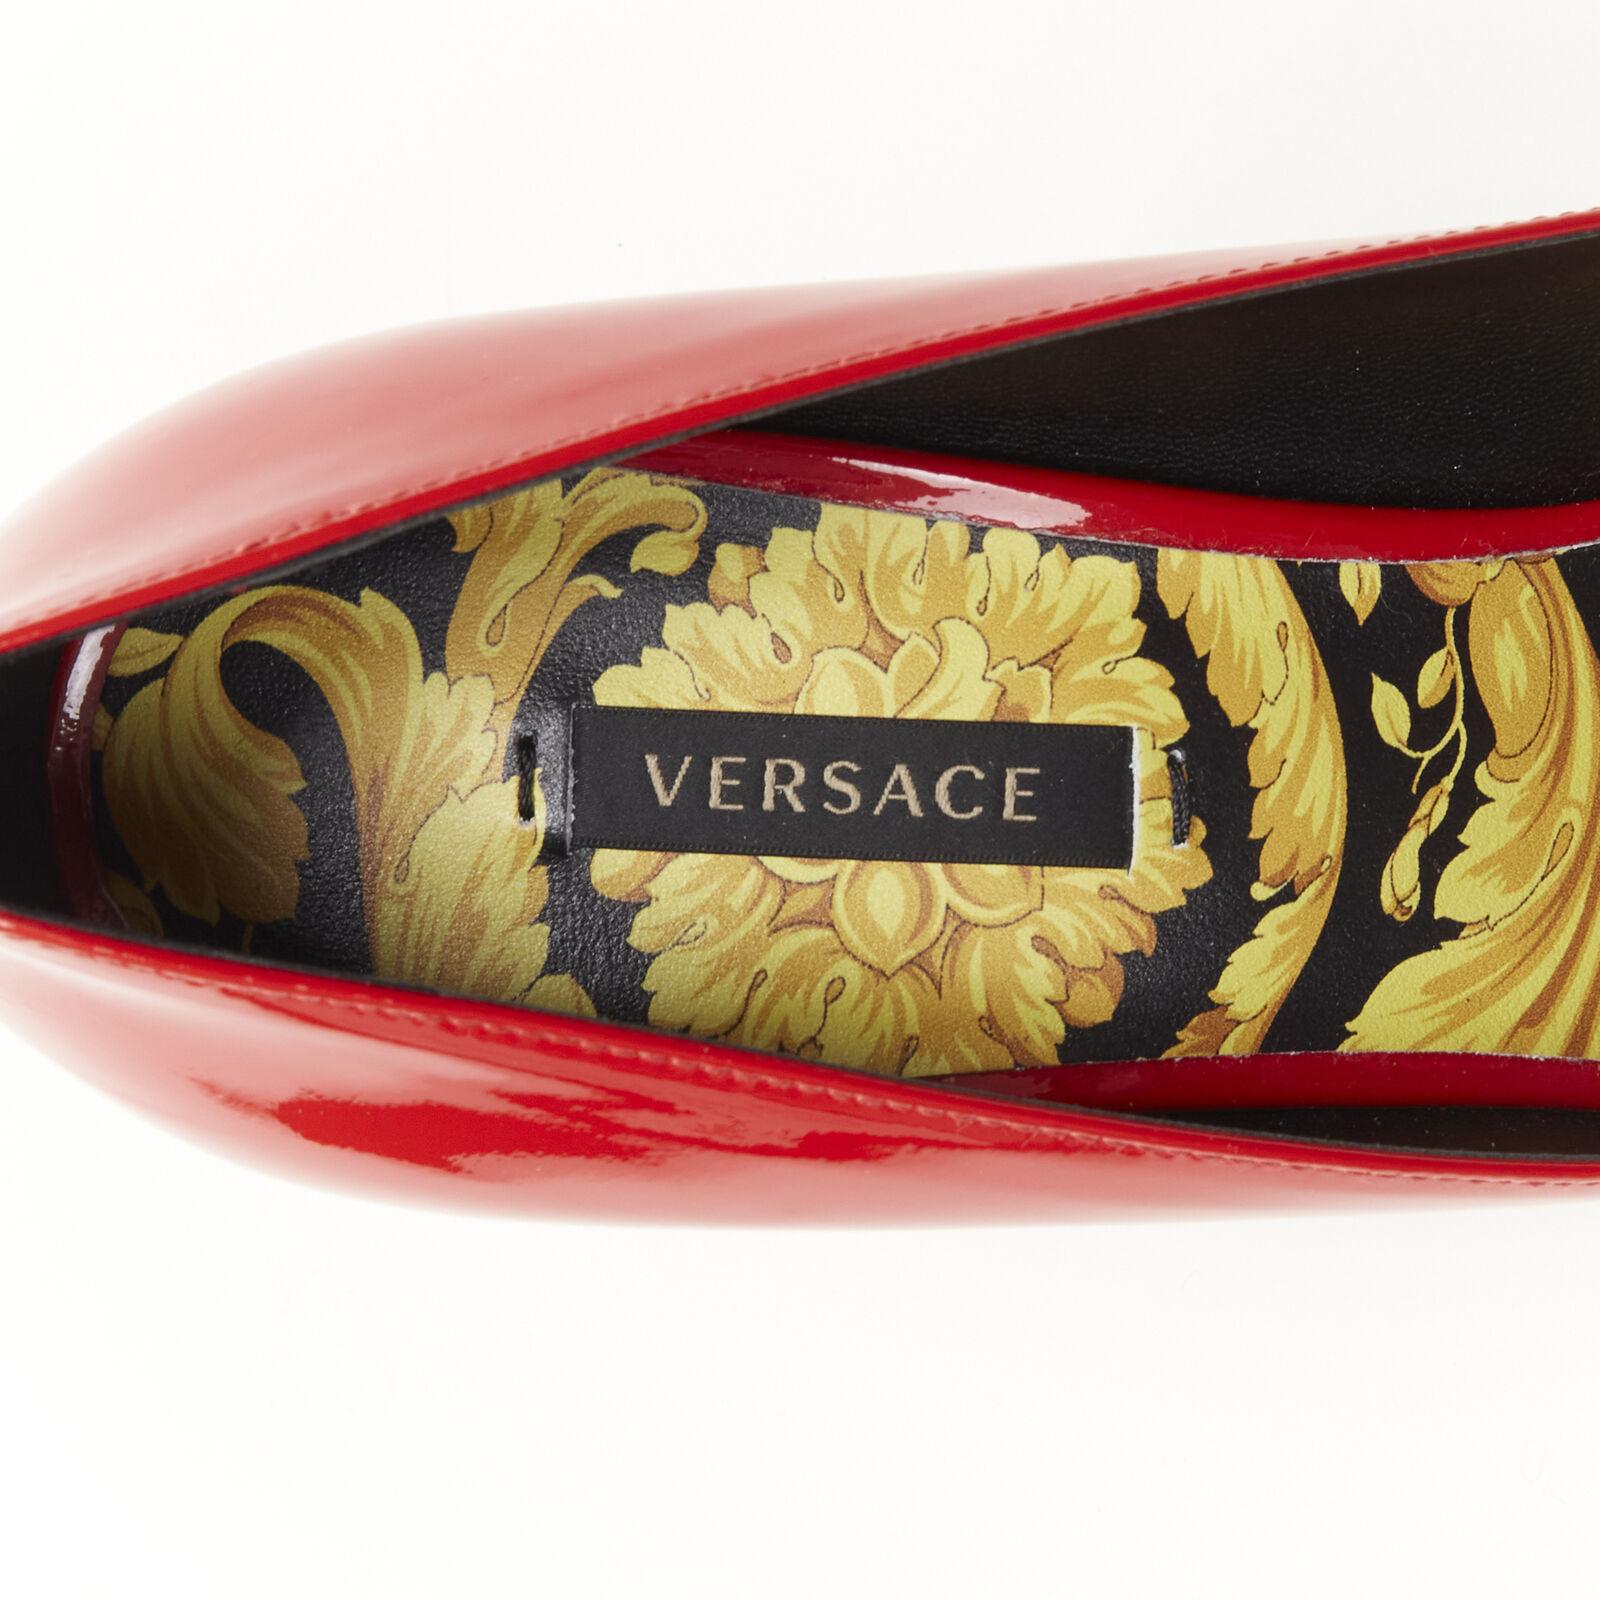 new VERSACE Hibiscus Barocco Eros red patent floral sole Medusa pump US7 EU37 For Sale 5